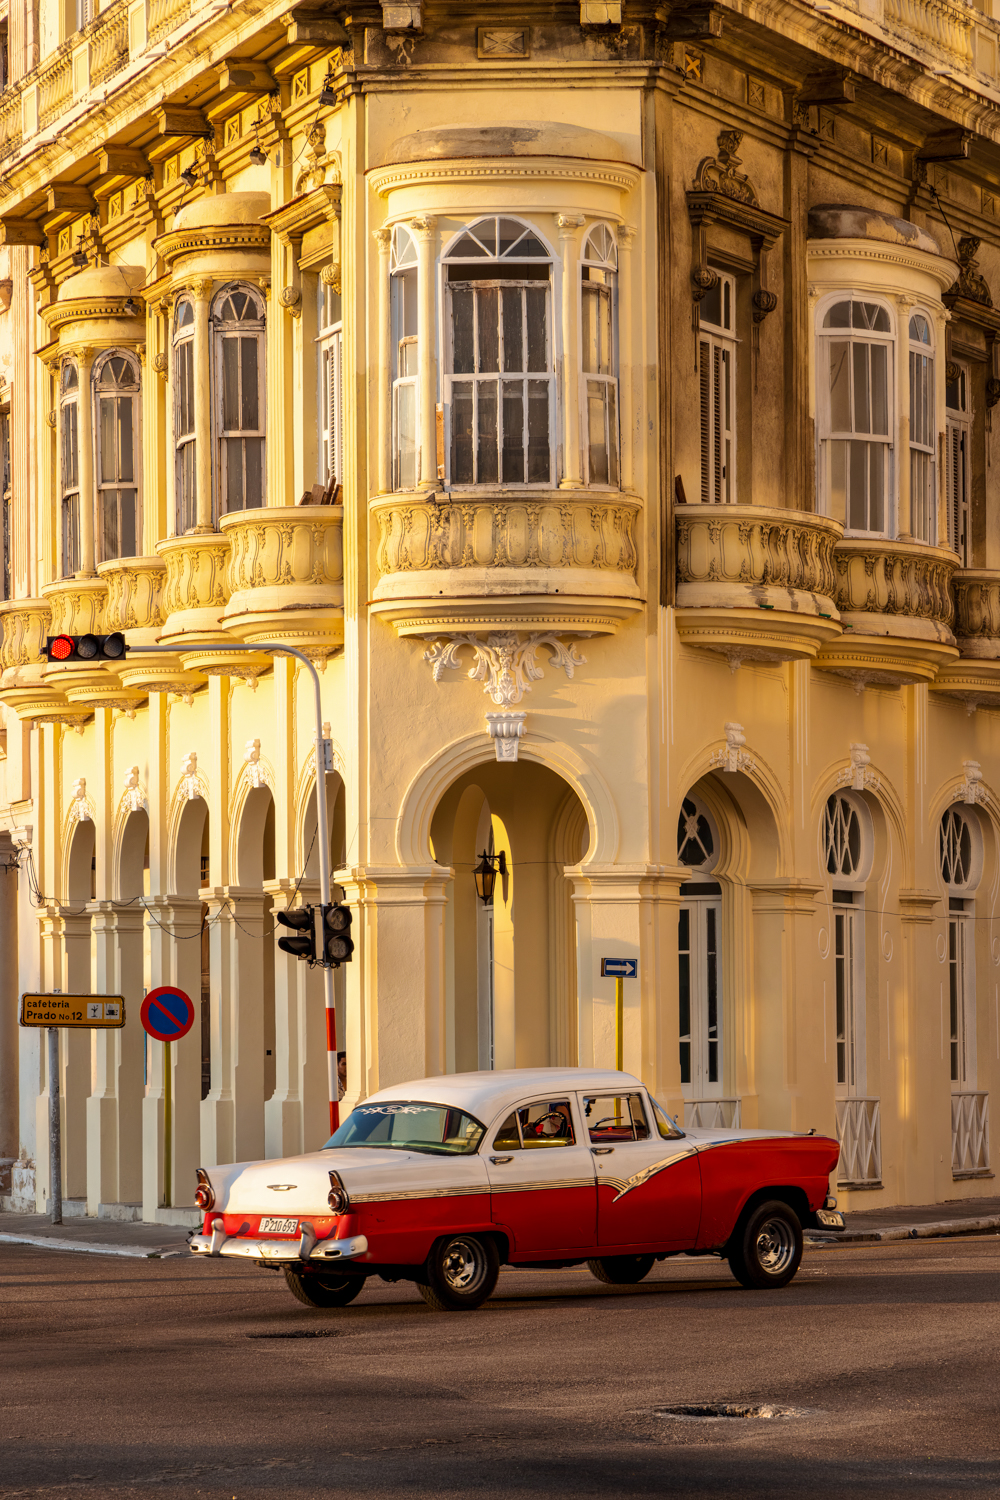 Cuba ornate building and old car